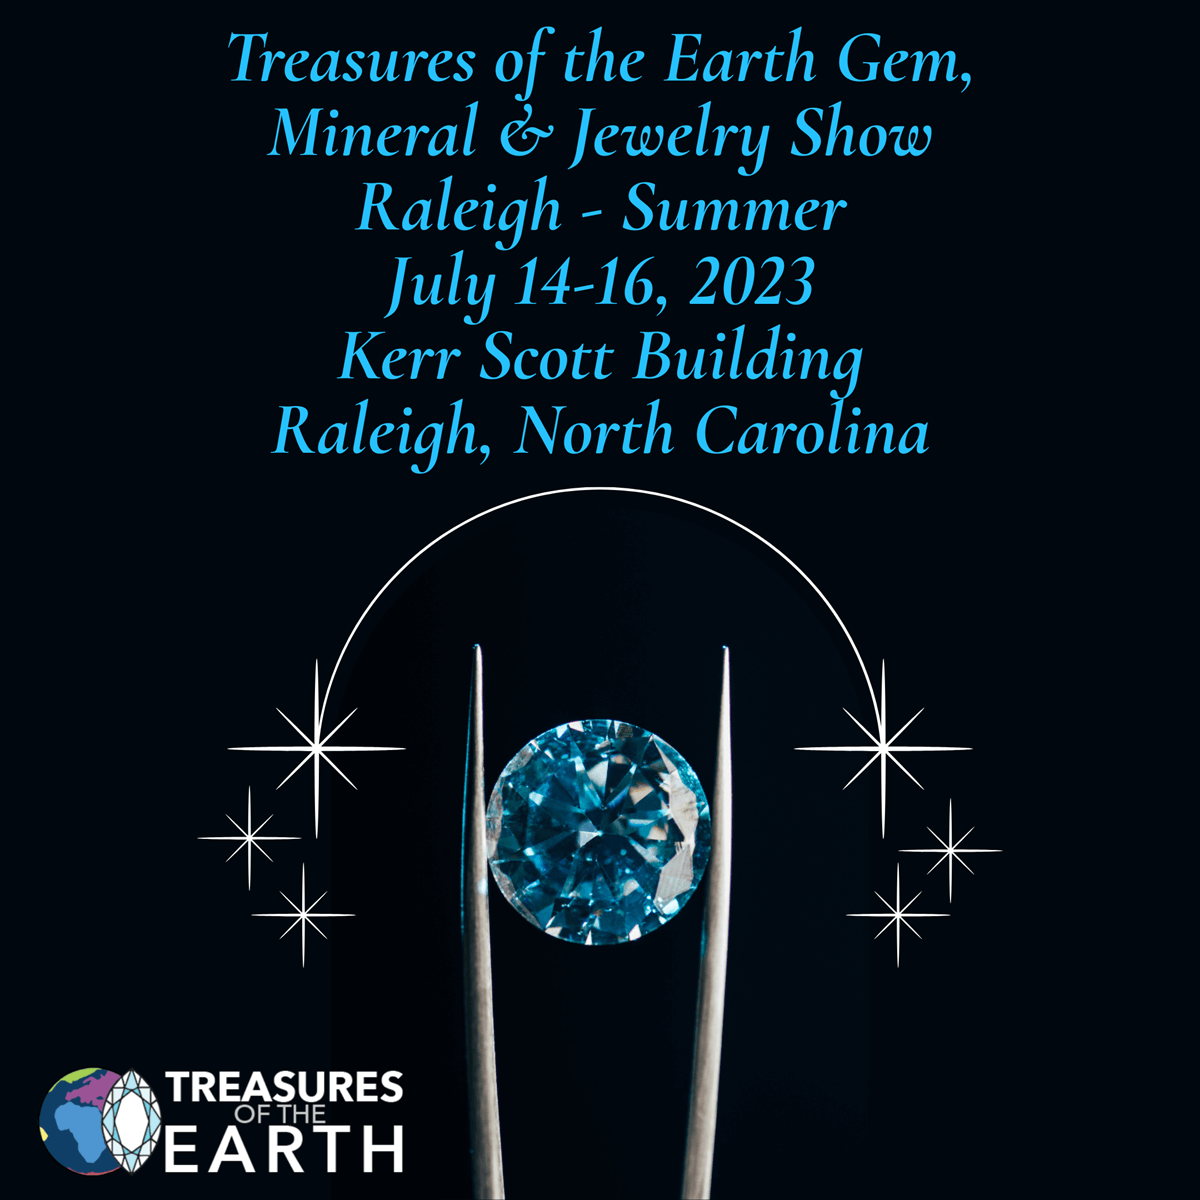 Treasures of the Earth Mineral & Jewelry Show - Raleigh - Summer 2023